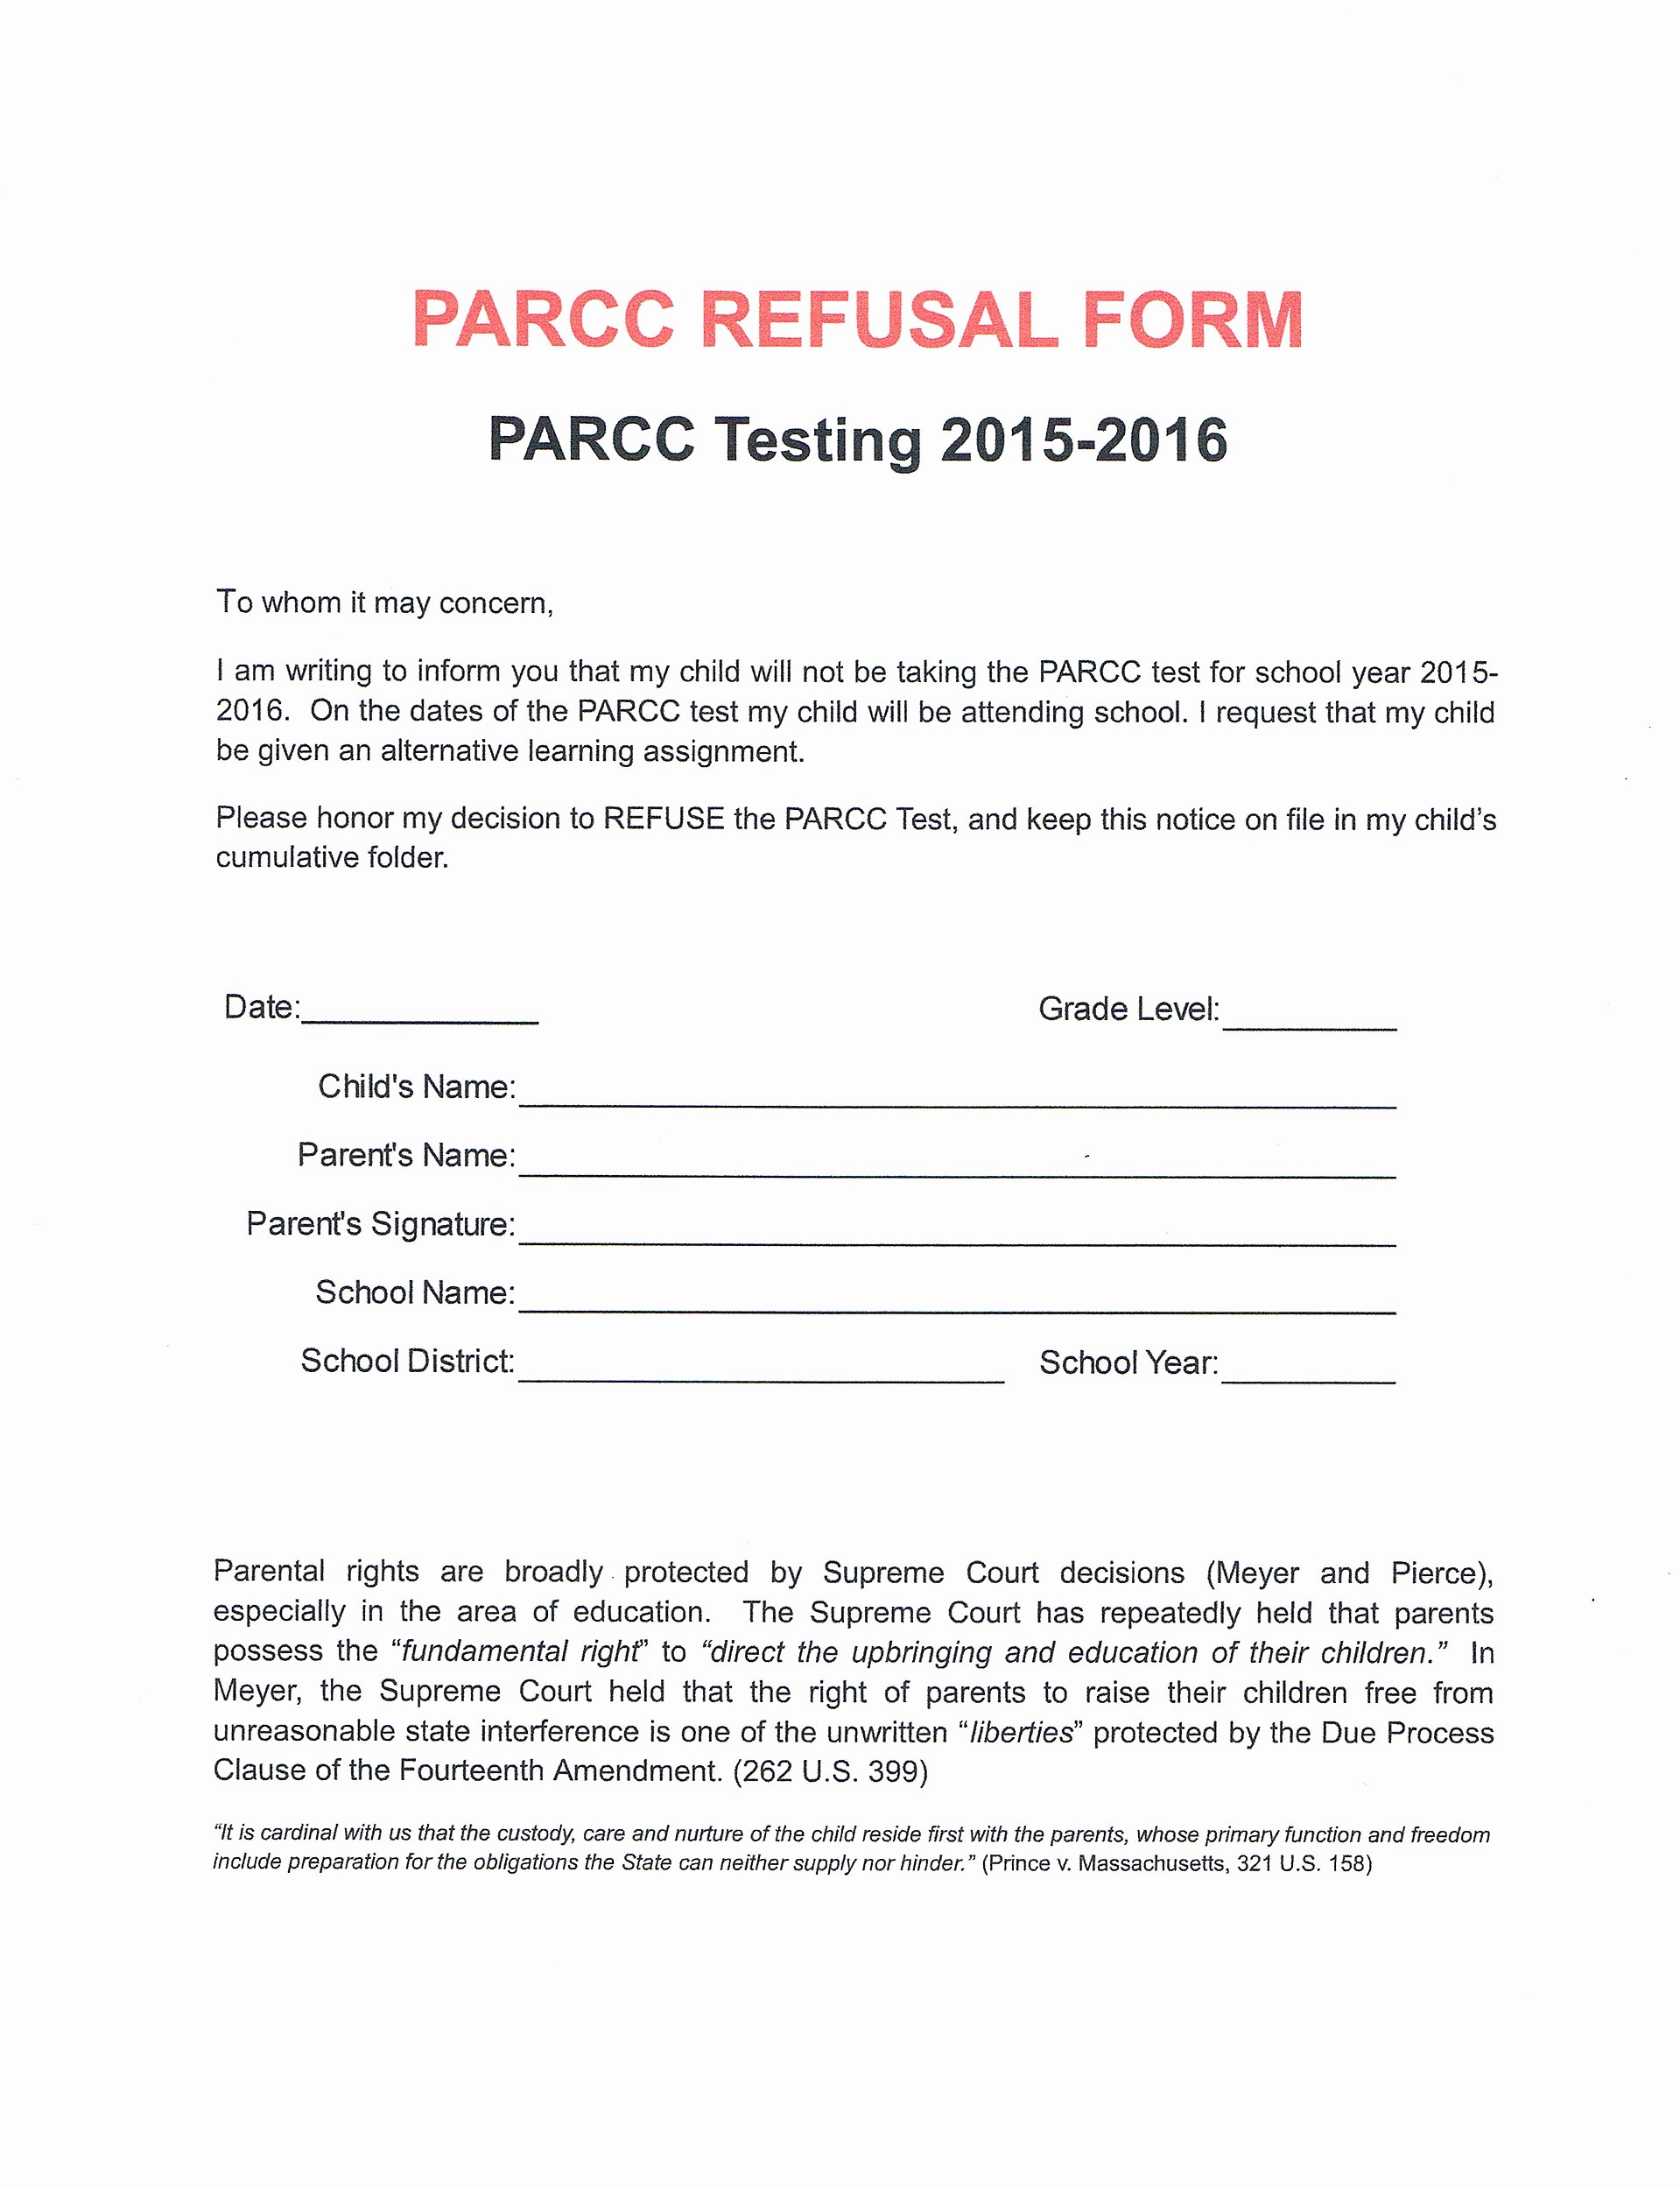 Medical Treatment Refusal form Template New form or Letter Another Reason to Refuse Parcc Testing